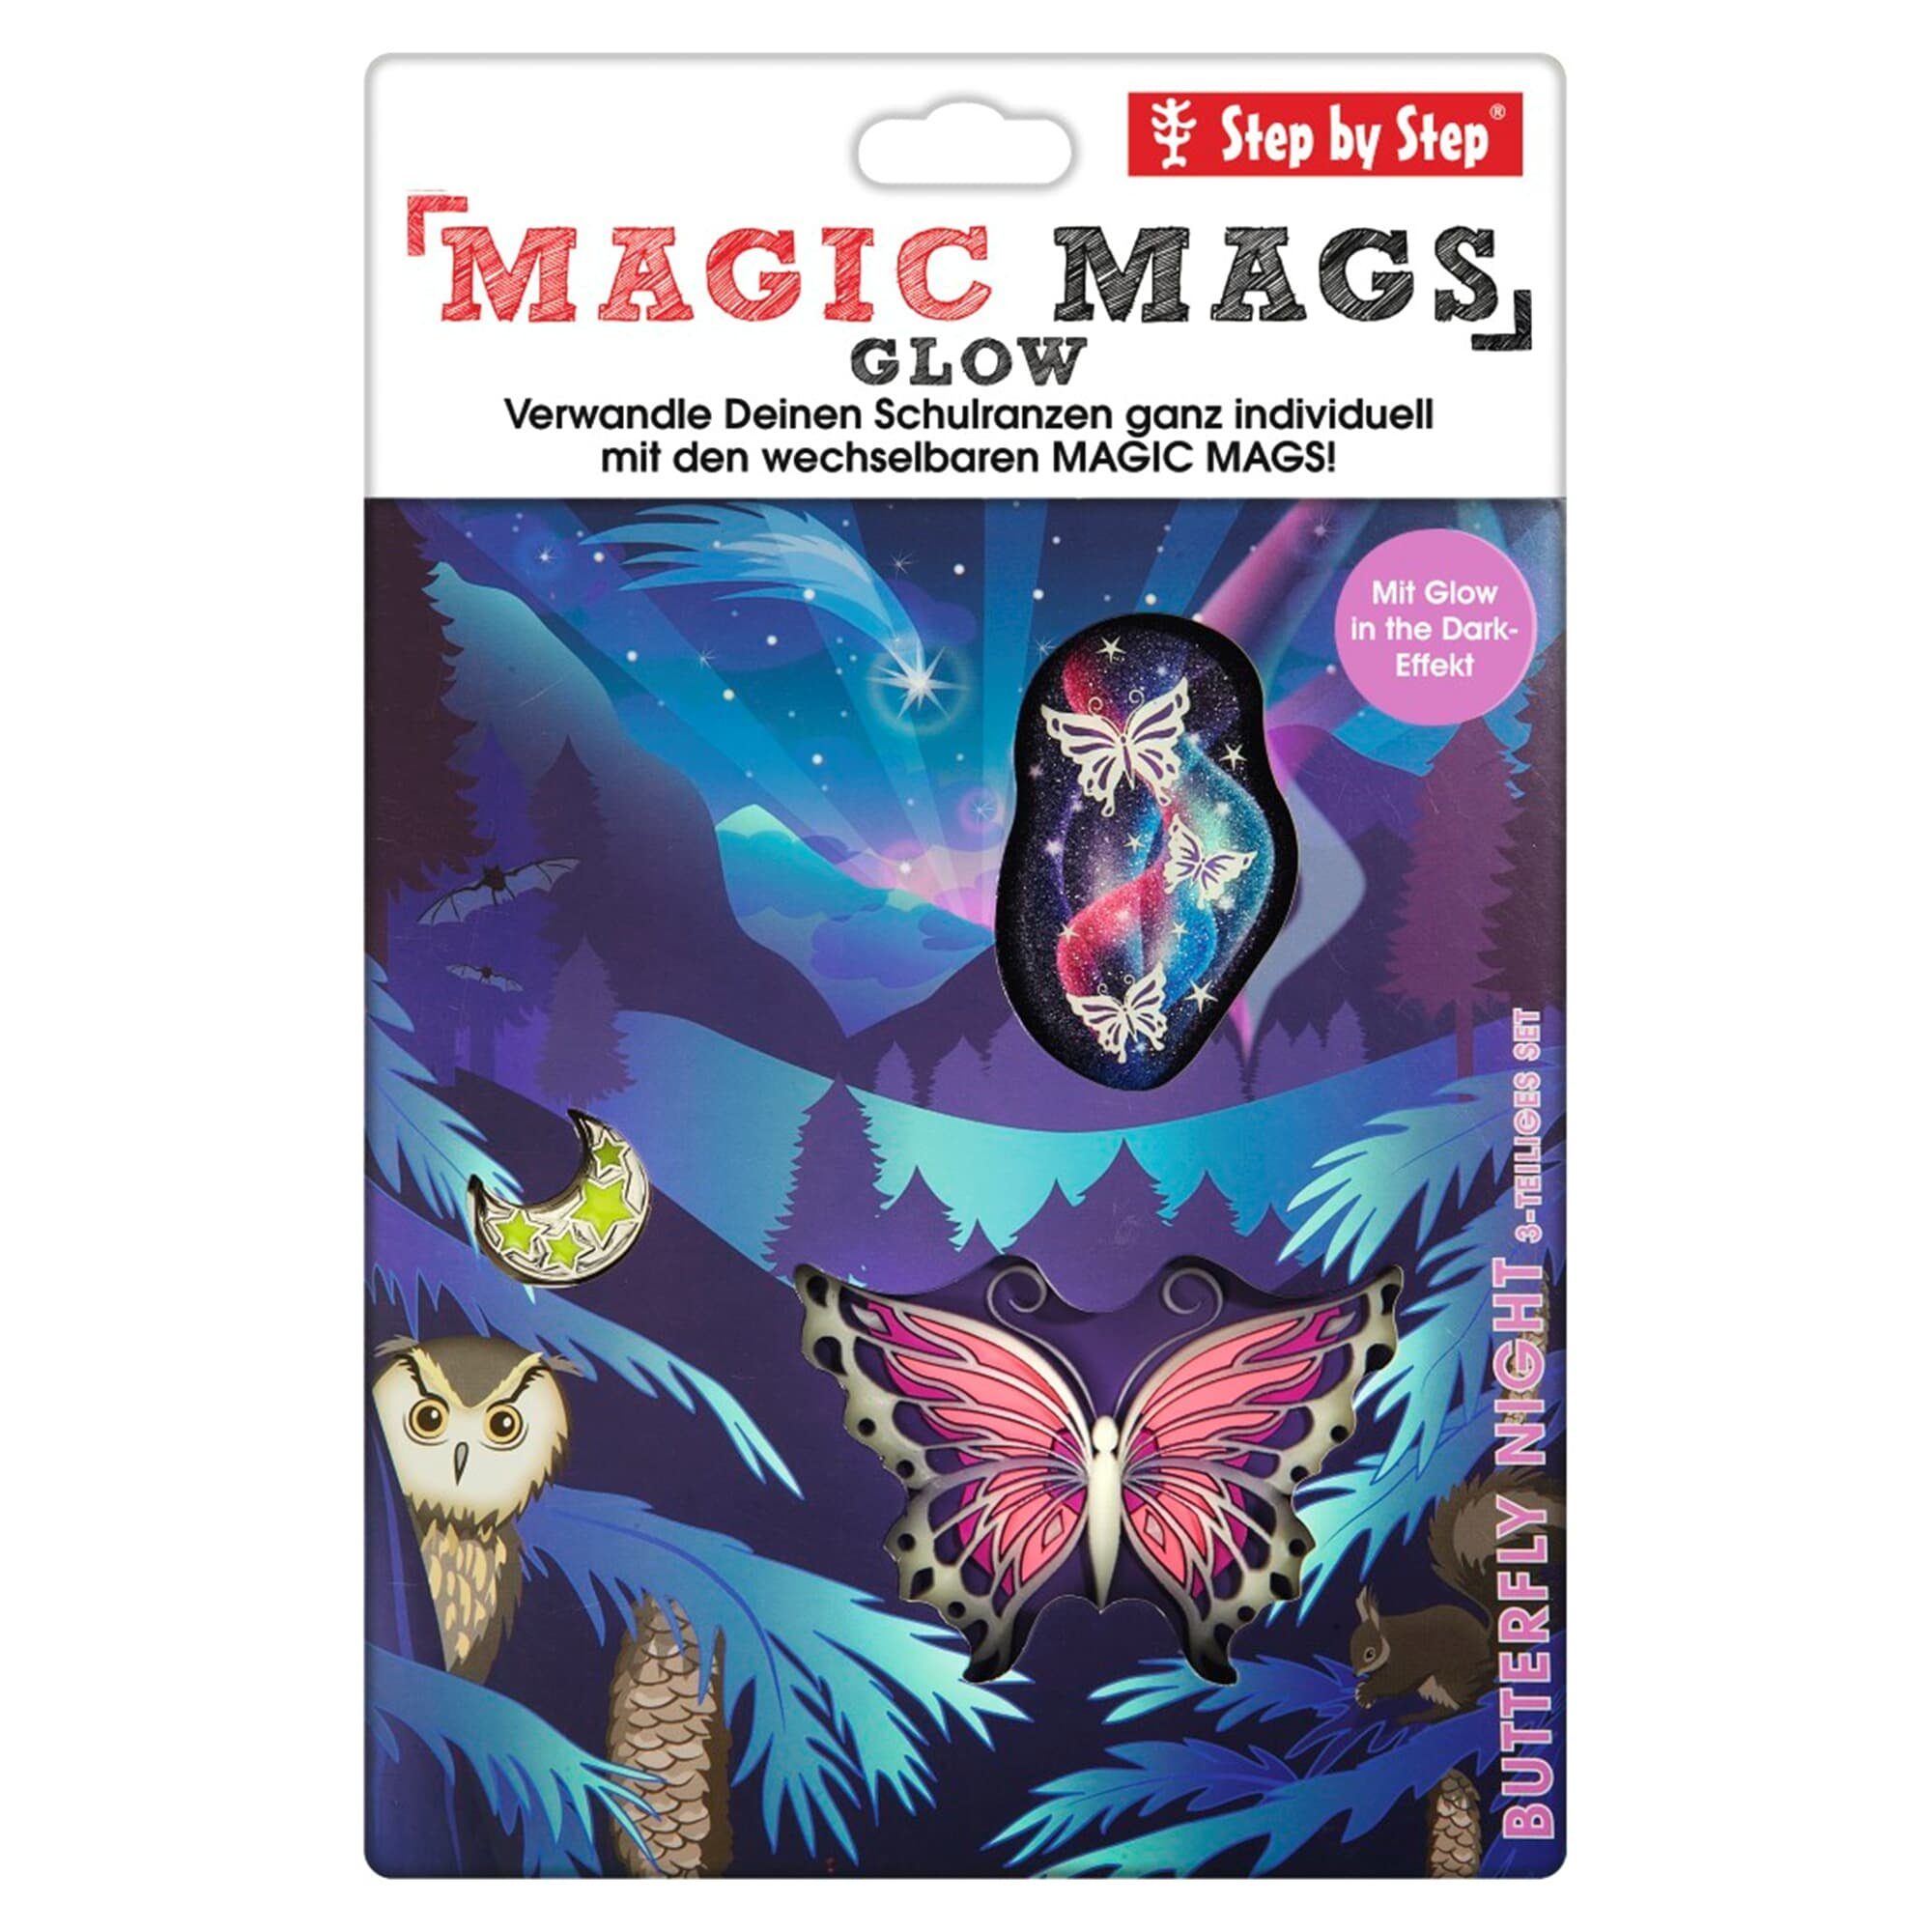 Ina Schulranzen Step Night MAGIC Step Butterfly by MAGS